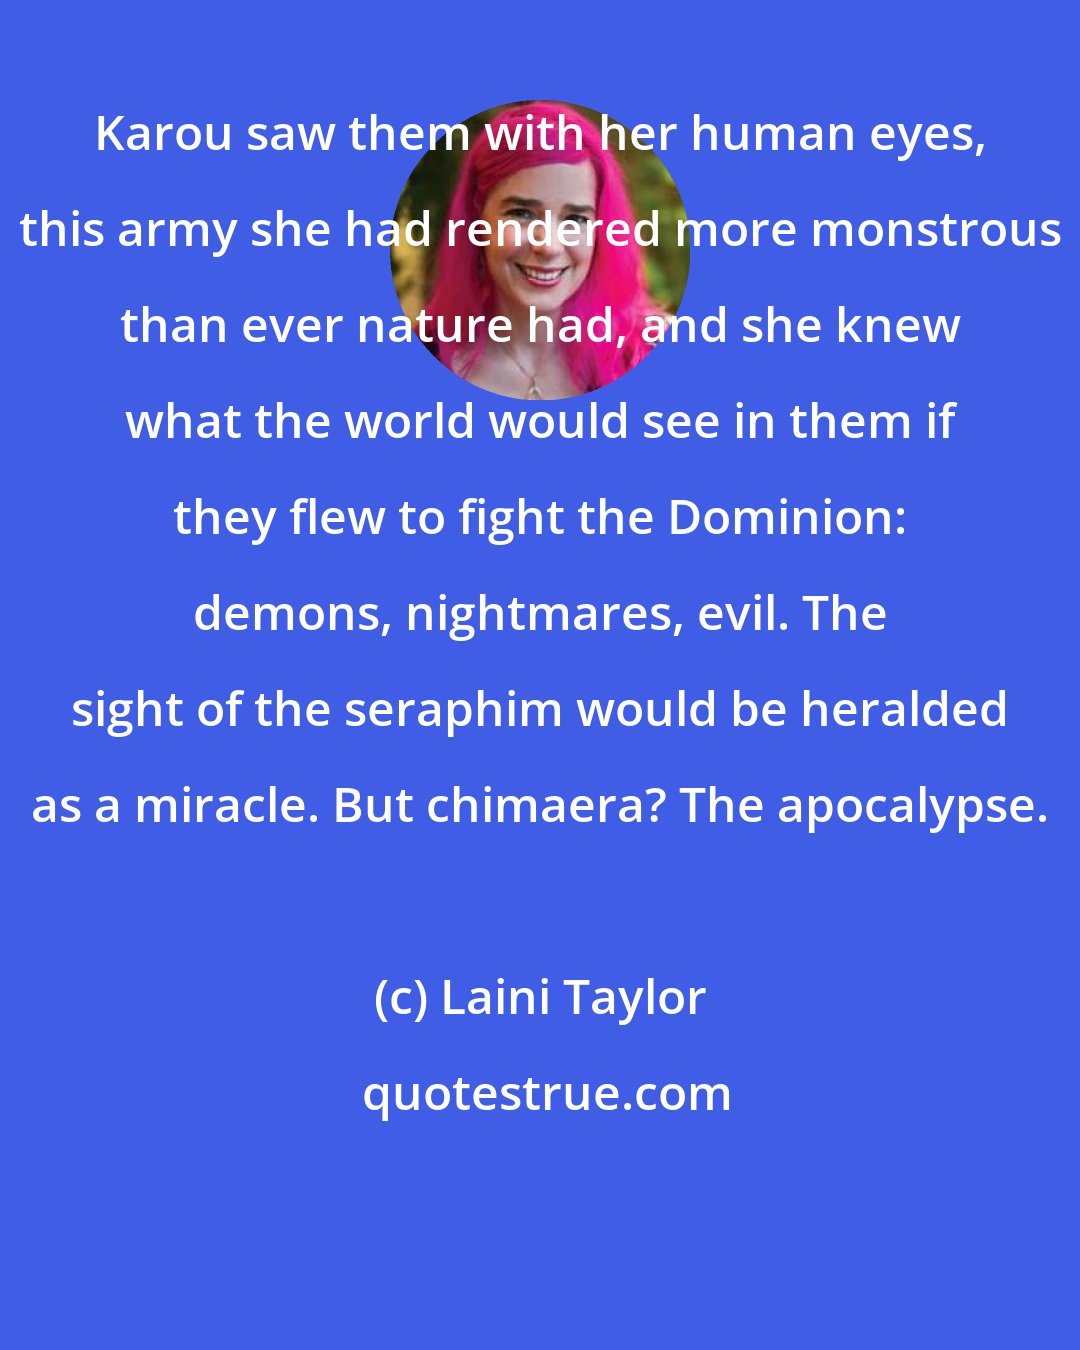 Laini Taylor: Karou saw them with her human eyes, this army she had rendered more monstrous than ever nature had, and she knew what the world would see in them if they flew to fight the Dominion: demons, nightmares, evil. The sight of the seraphim would be heralded as a miracle. But chimaera? The apocalypse.